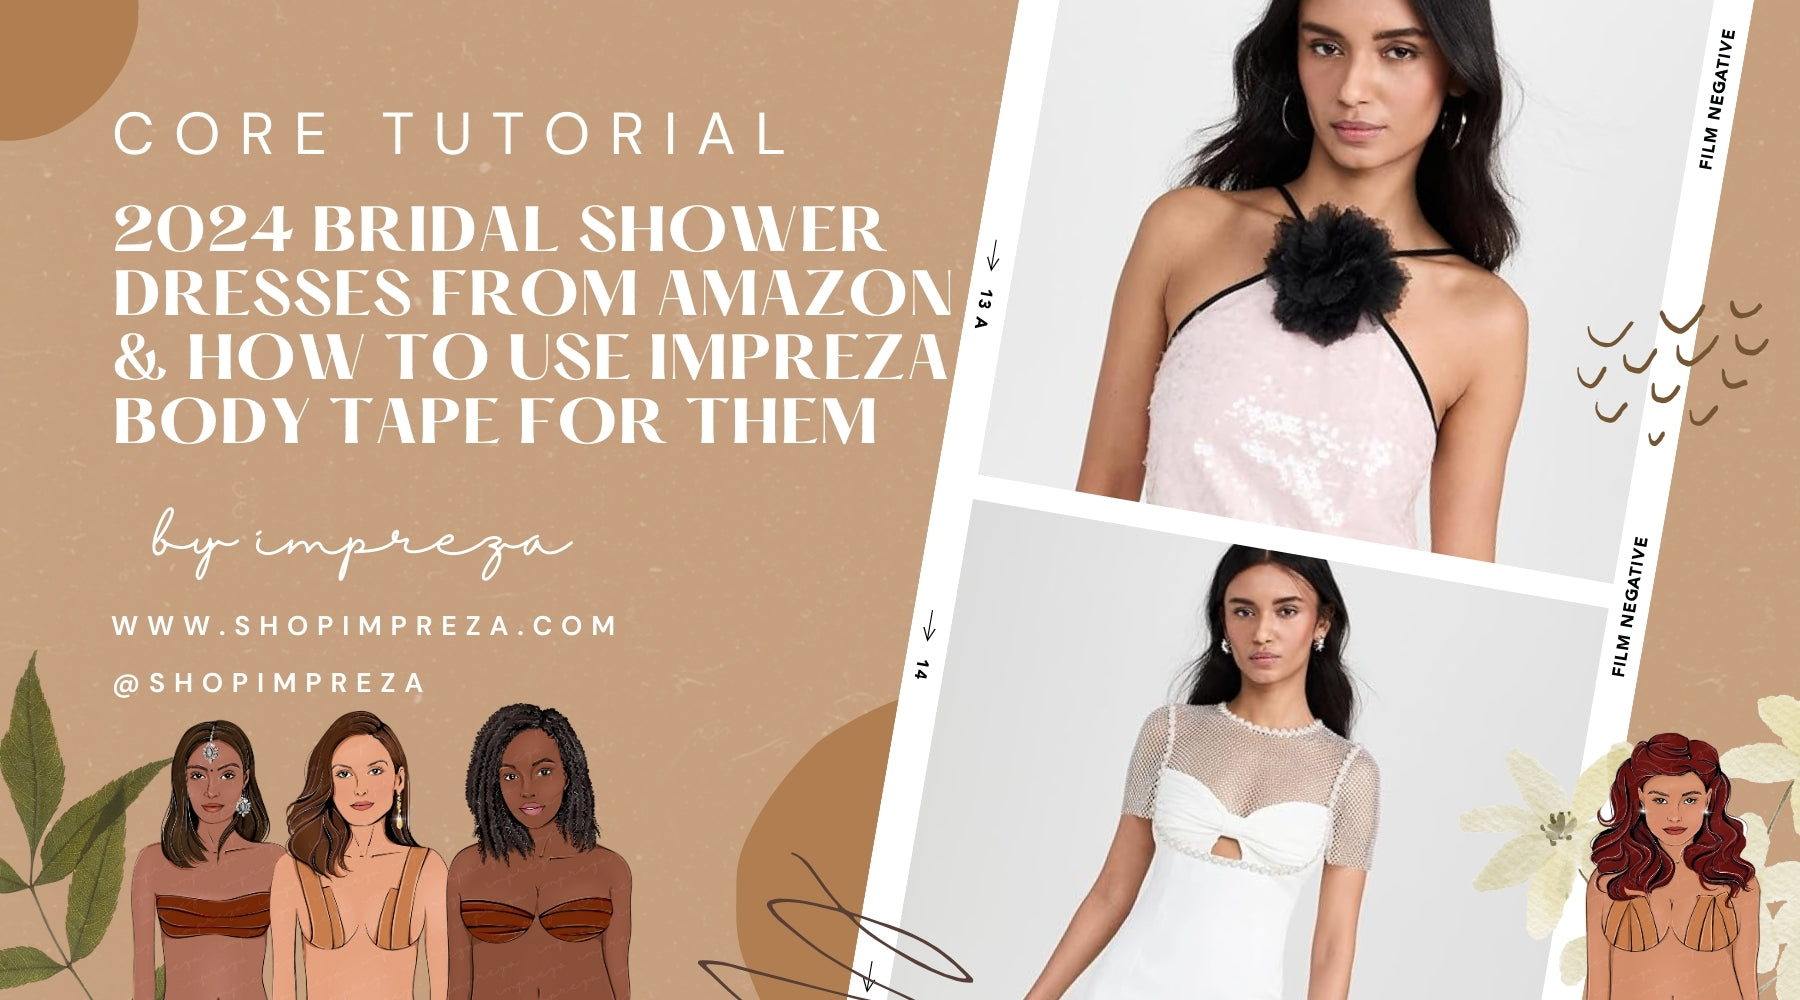 2024 Bridal Shower Dresses from Amazon & How to Use IMPREZA Body Tape for Them